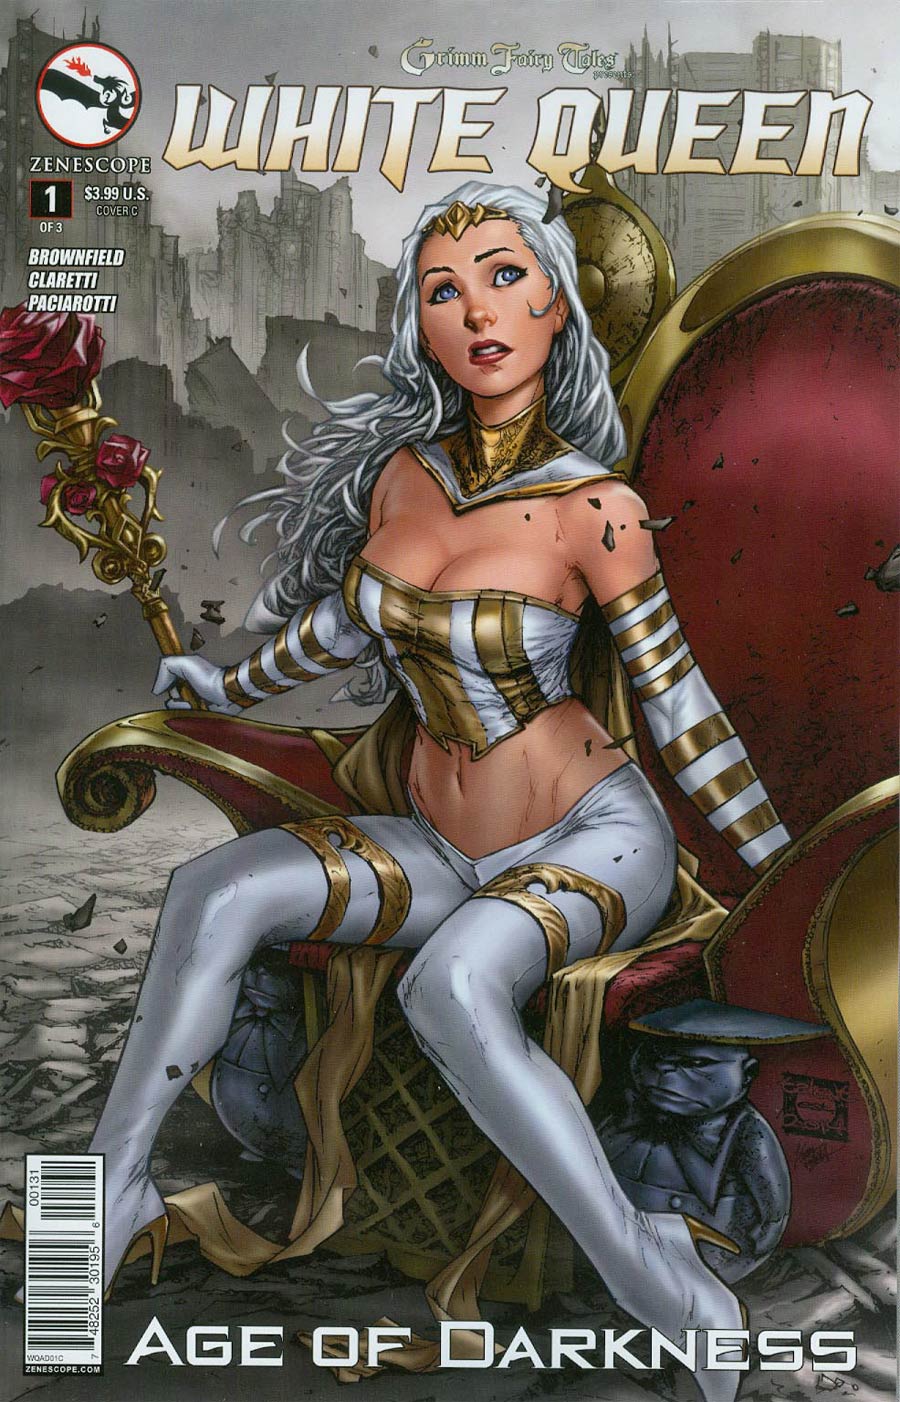 Grimm Fairy Tales Presents White Queen #1 Cover C Talent Caldwell (Age Of Darkness Tie-In)